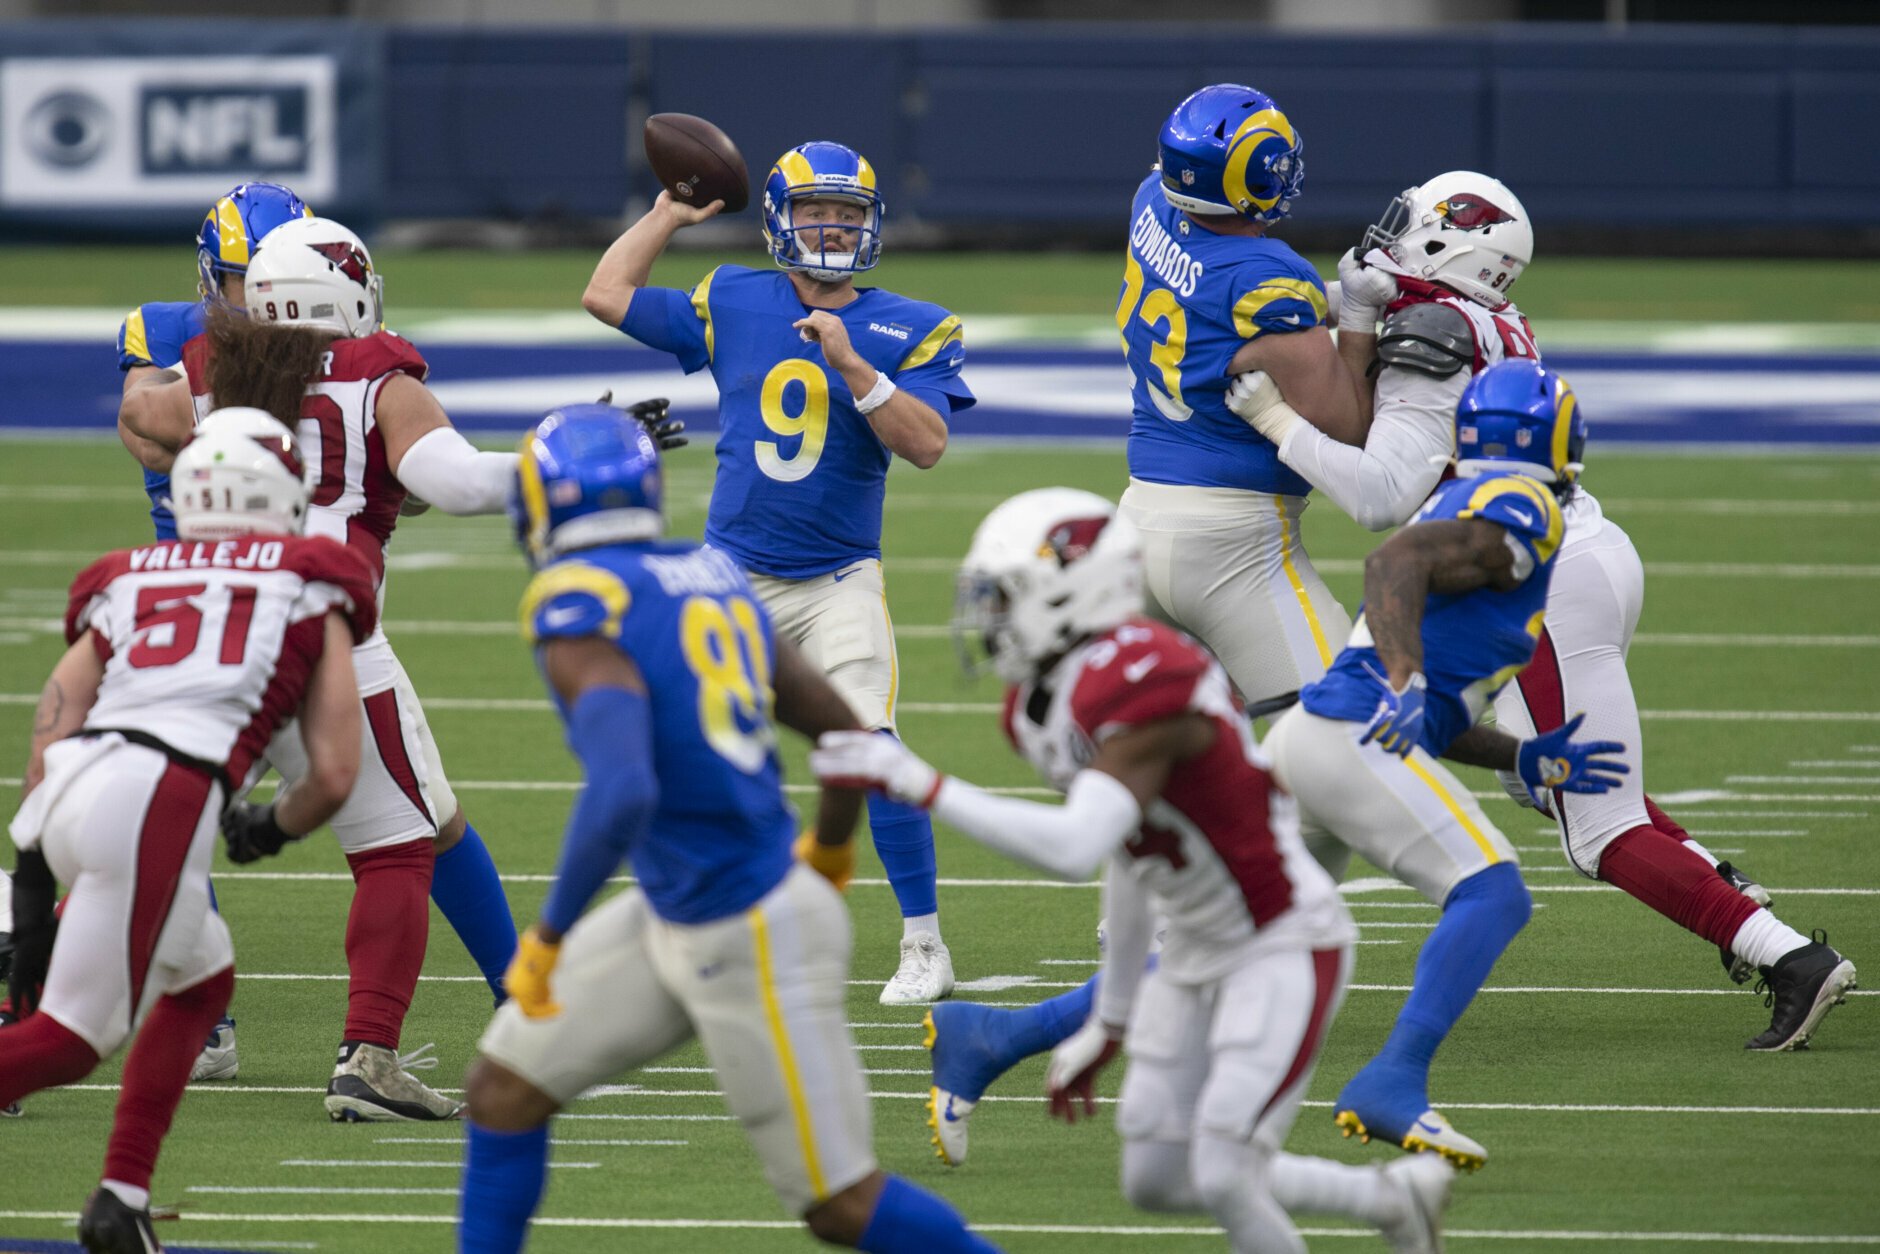 <p><b><i>Cardinals 7</i></b><br />
<b><i>Rams 18</i></b></p>
<p><a href="https://twitter.com/ESPNStatsInfo/status/1344738397475254274?s=20" target="_blank" rel="noopener">John Wolford&#8217;s historic first start</a> was only good enough to beat an Arizona squad playing a tatted-up QB who had never thrown a pass in the NFL. The Rams should be careful <a href="https://twitter.com/ESPNNFL/status/1345901607507144705?s=20" target="_blank" rel="noopener">what they wish for</a> — they&#8217;ll get no such benefits in Seattle next week.</p>
<p>Despite <a href="https://wtop.com/nfl/2020/09/2020-nfc-west-preview/" target="_blank" rel="noopener">my high expectations</a>, the Cardinals have missed the playoffs for the fifth straight season thanks largely to four losses to teams with losing records. Consider this the initial warming of Kliff Kingsbury&#8217;s seat.</p>
